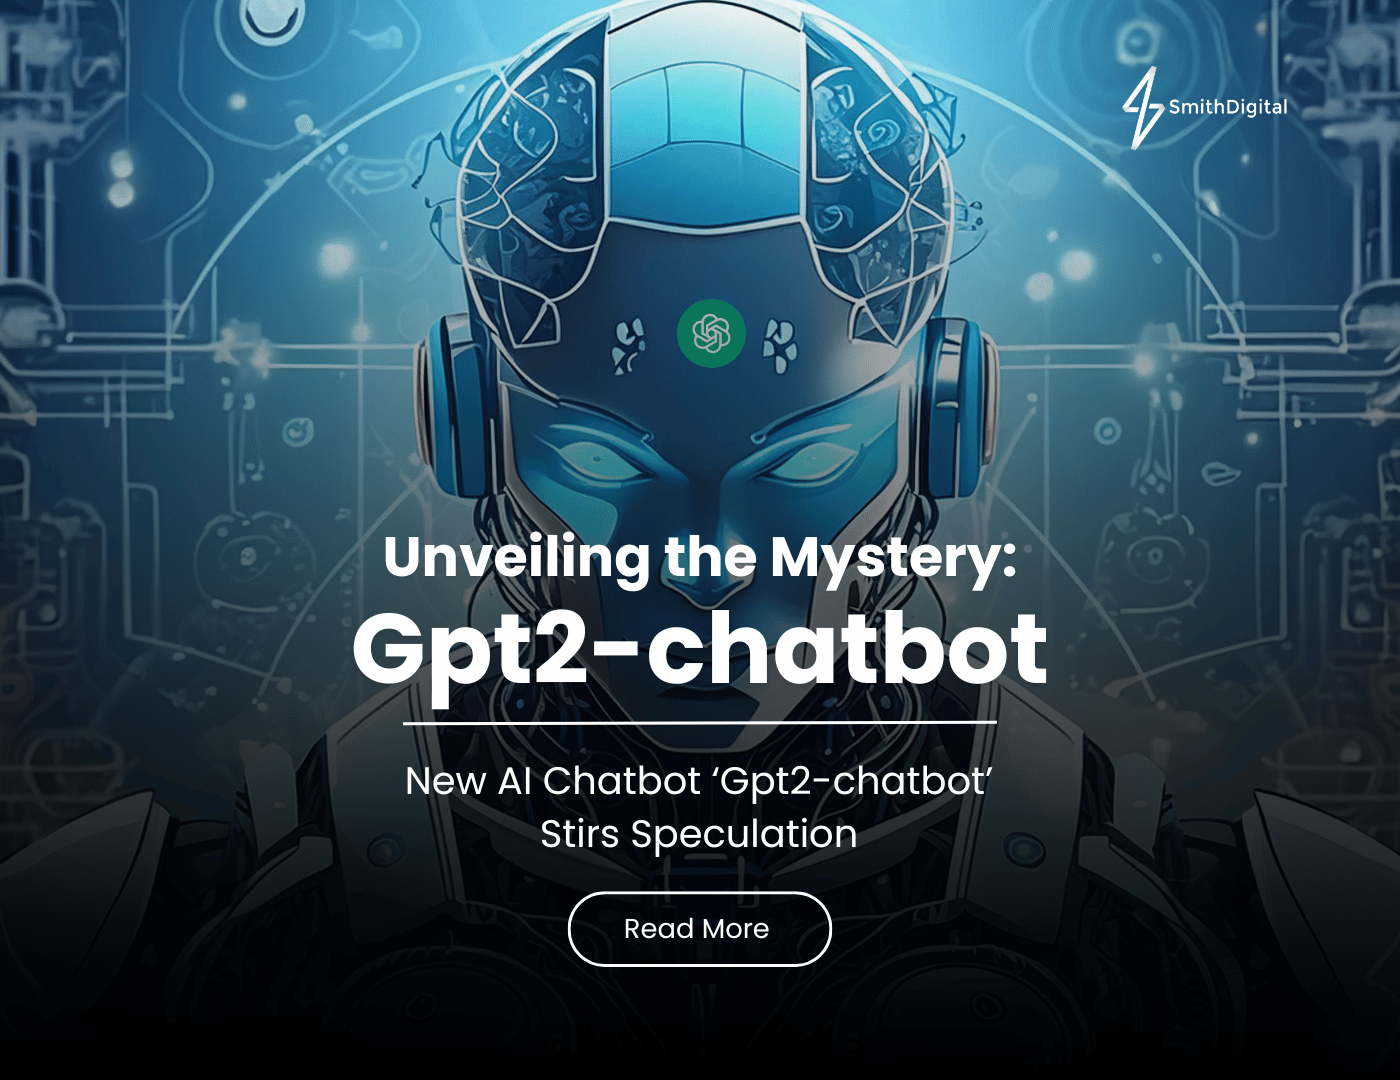 New AI Chatbot ‘Gpt2-chatbot’ Stirs Speculation